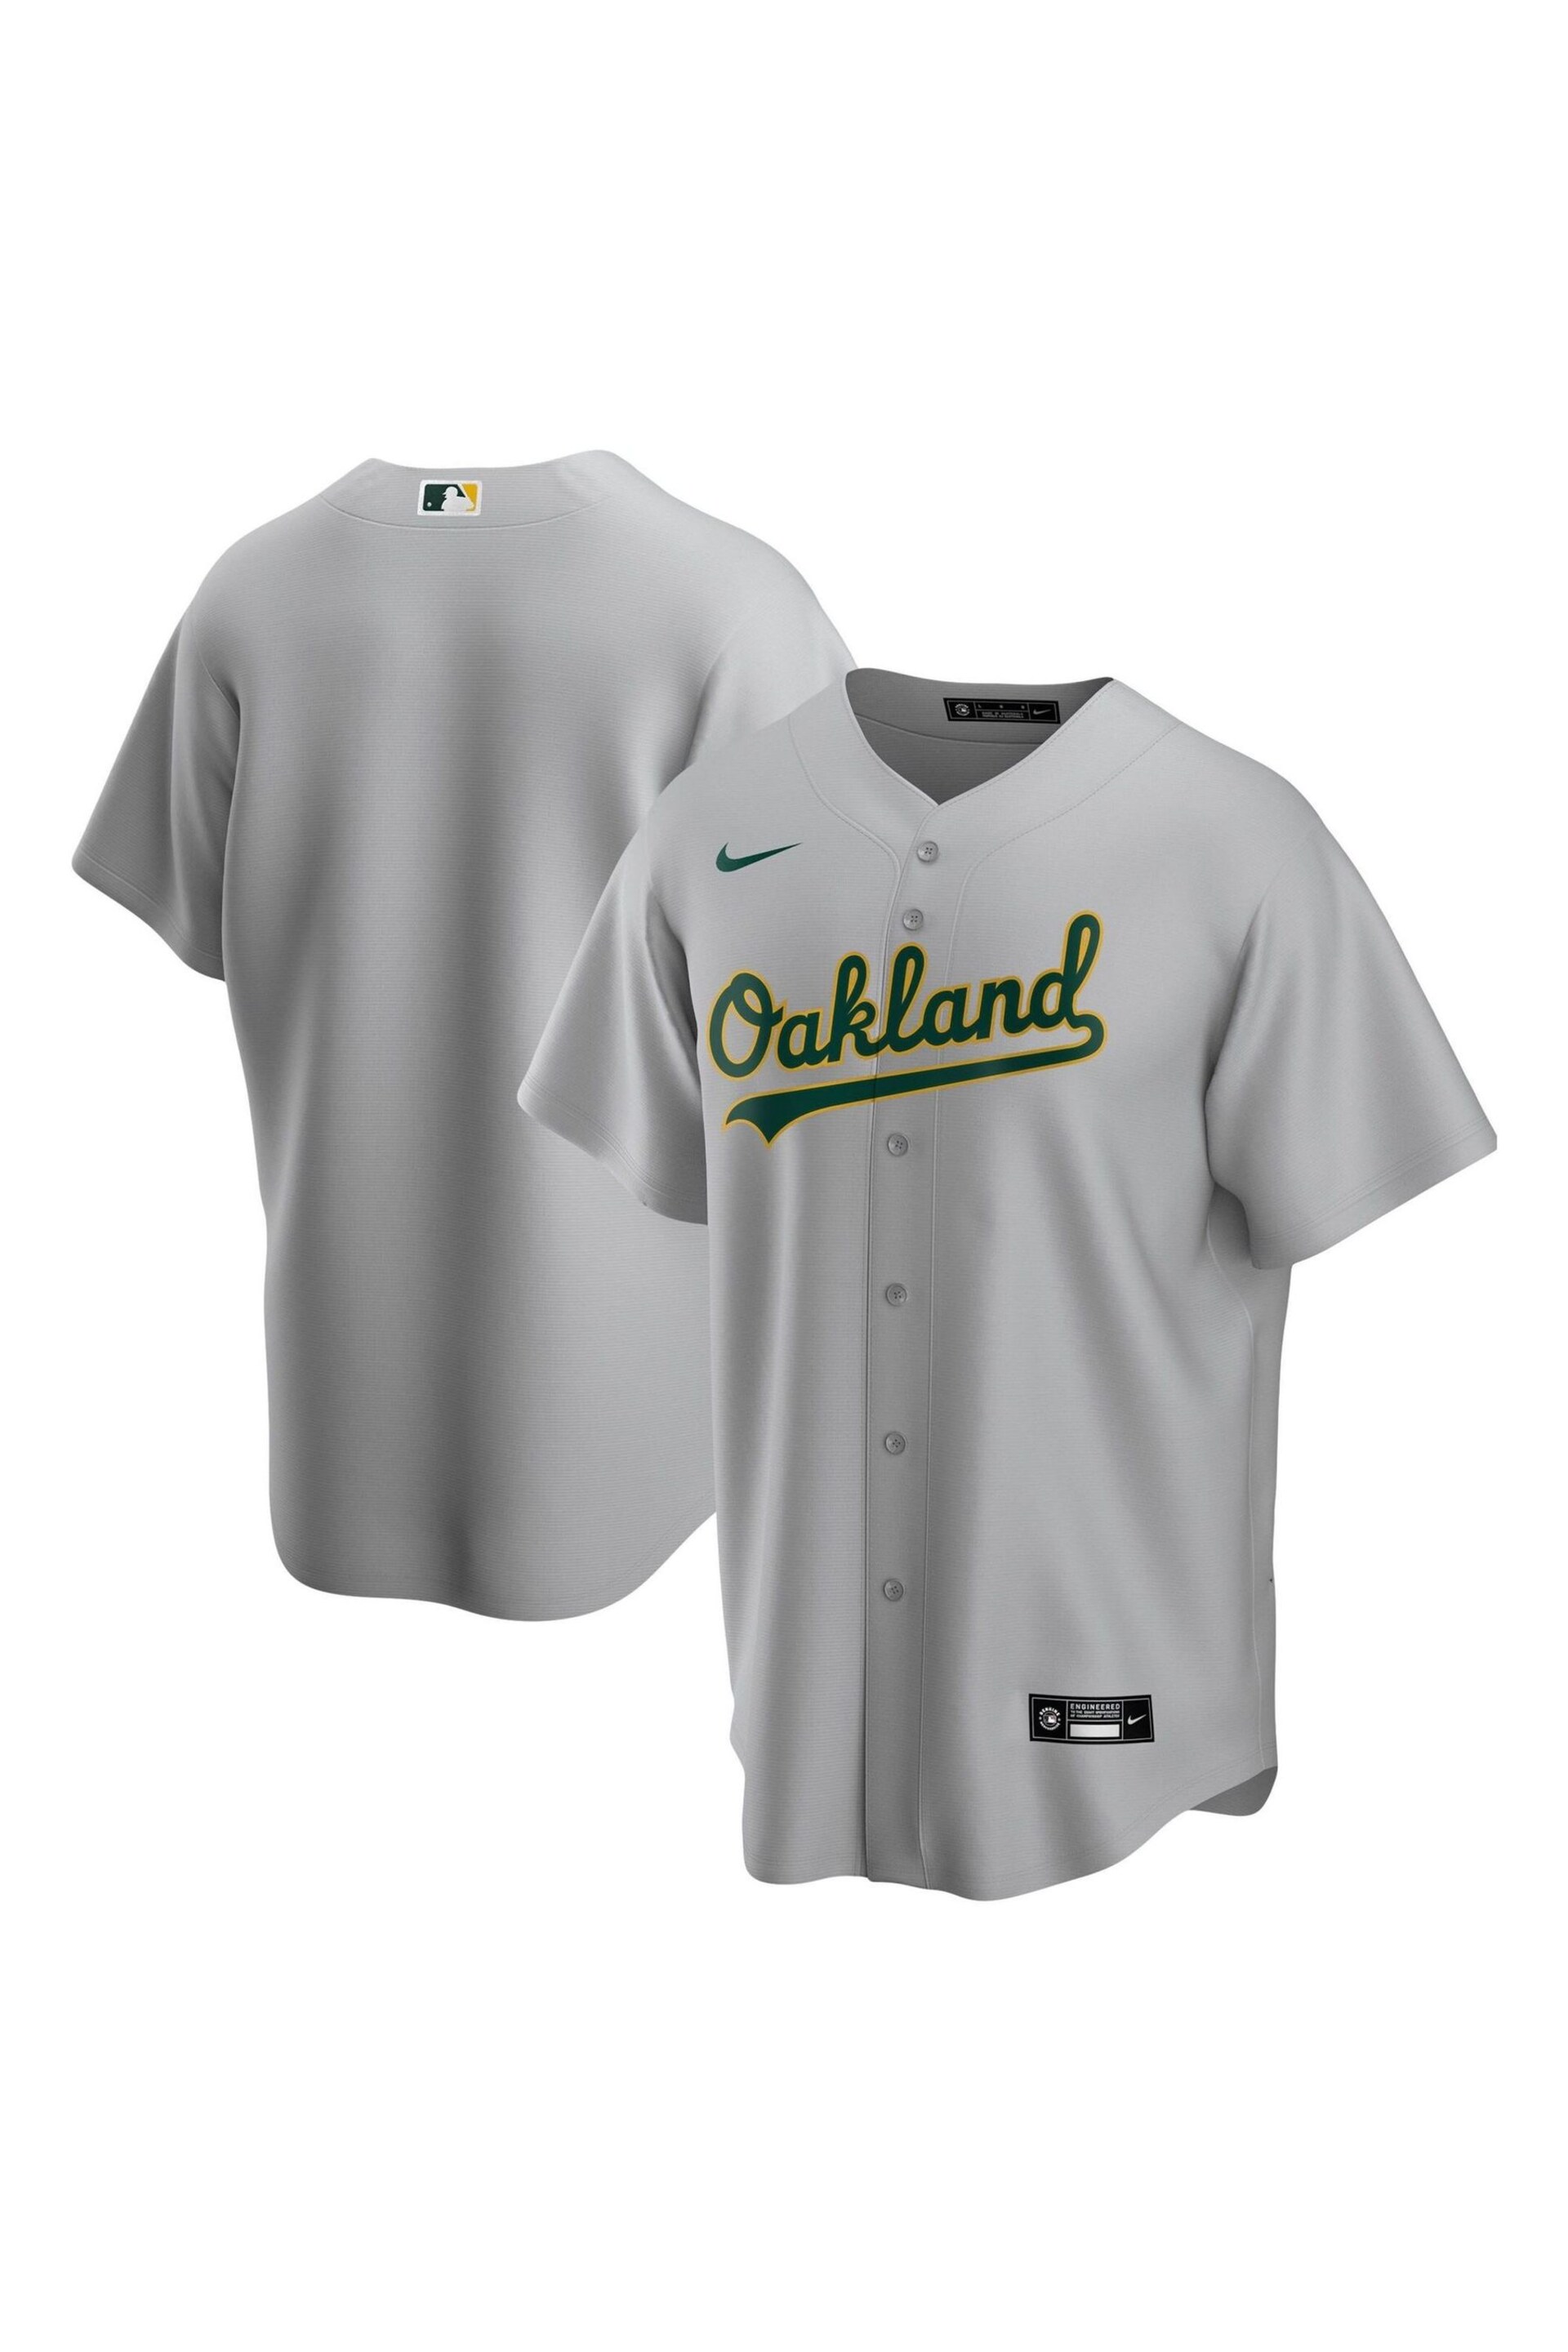 Nike Grey Oakland Athletics Official Replica Road Jersey - Image 1 of 3